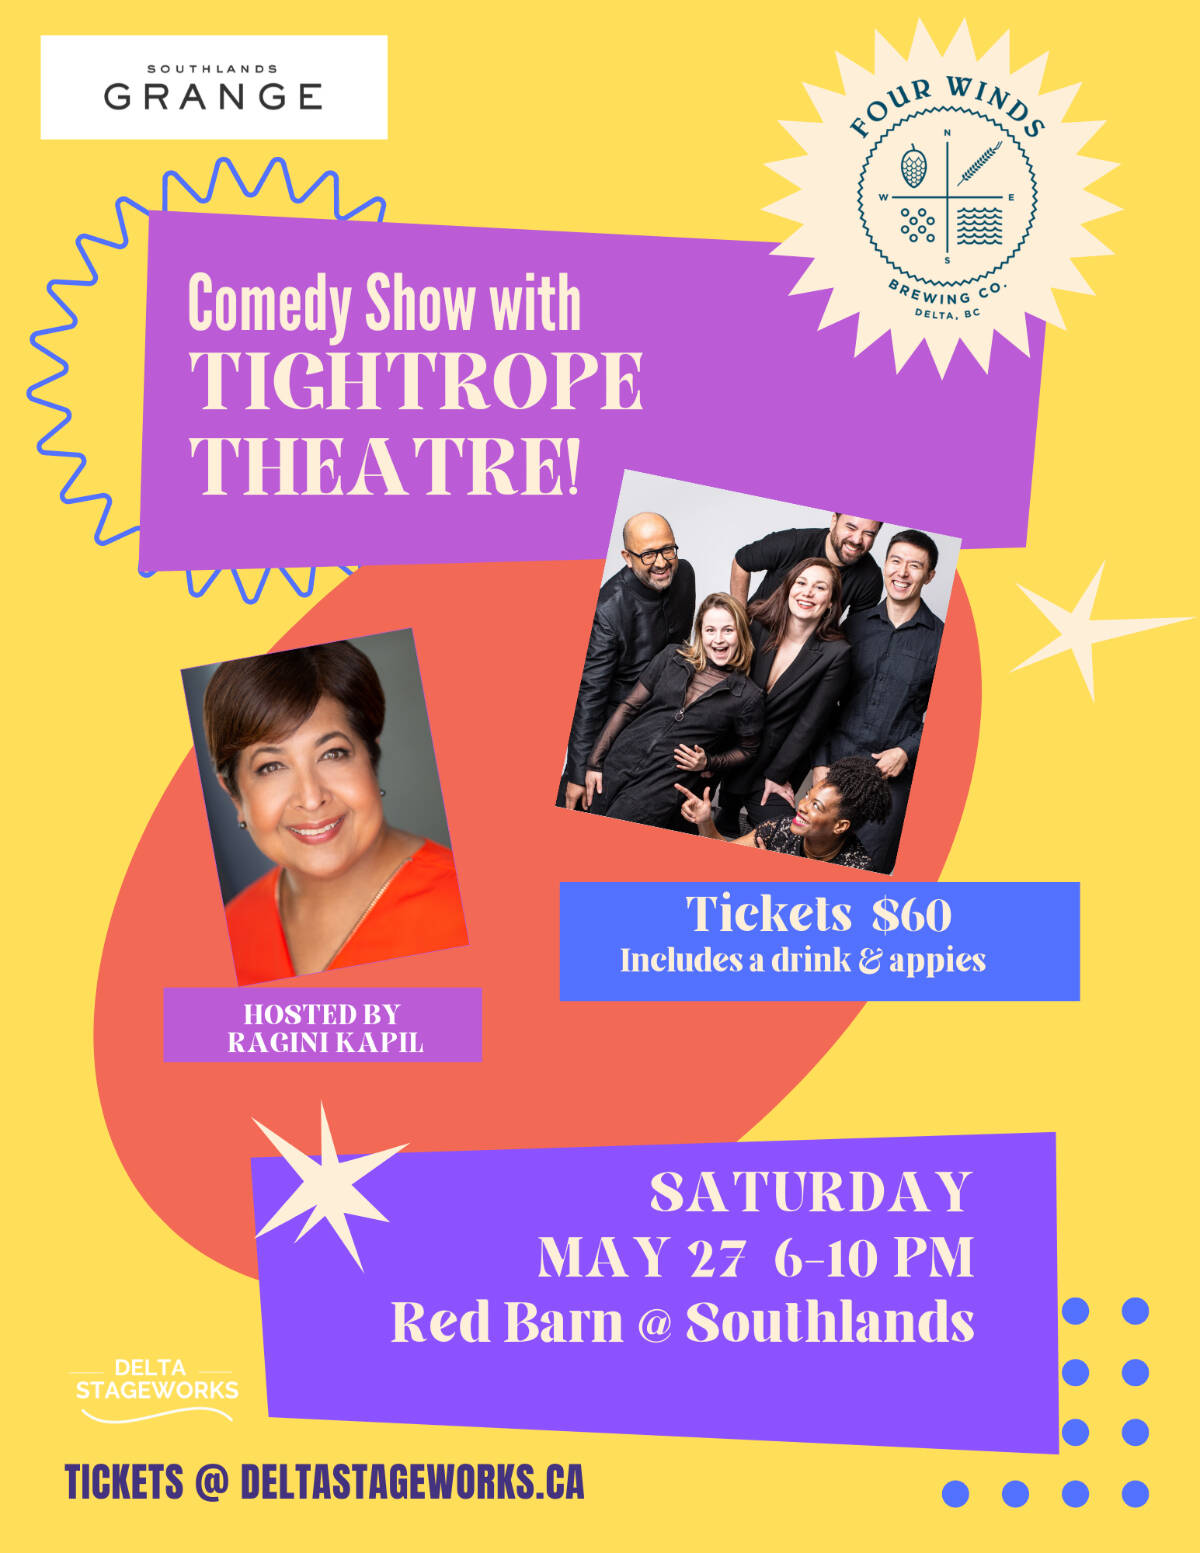 32625065_web1_230511-NDR-M-Delta-Stageworks-Tightrope-Theatre-comedy-show-flyer-VERTICAL